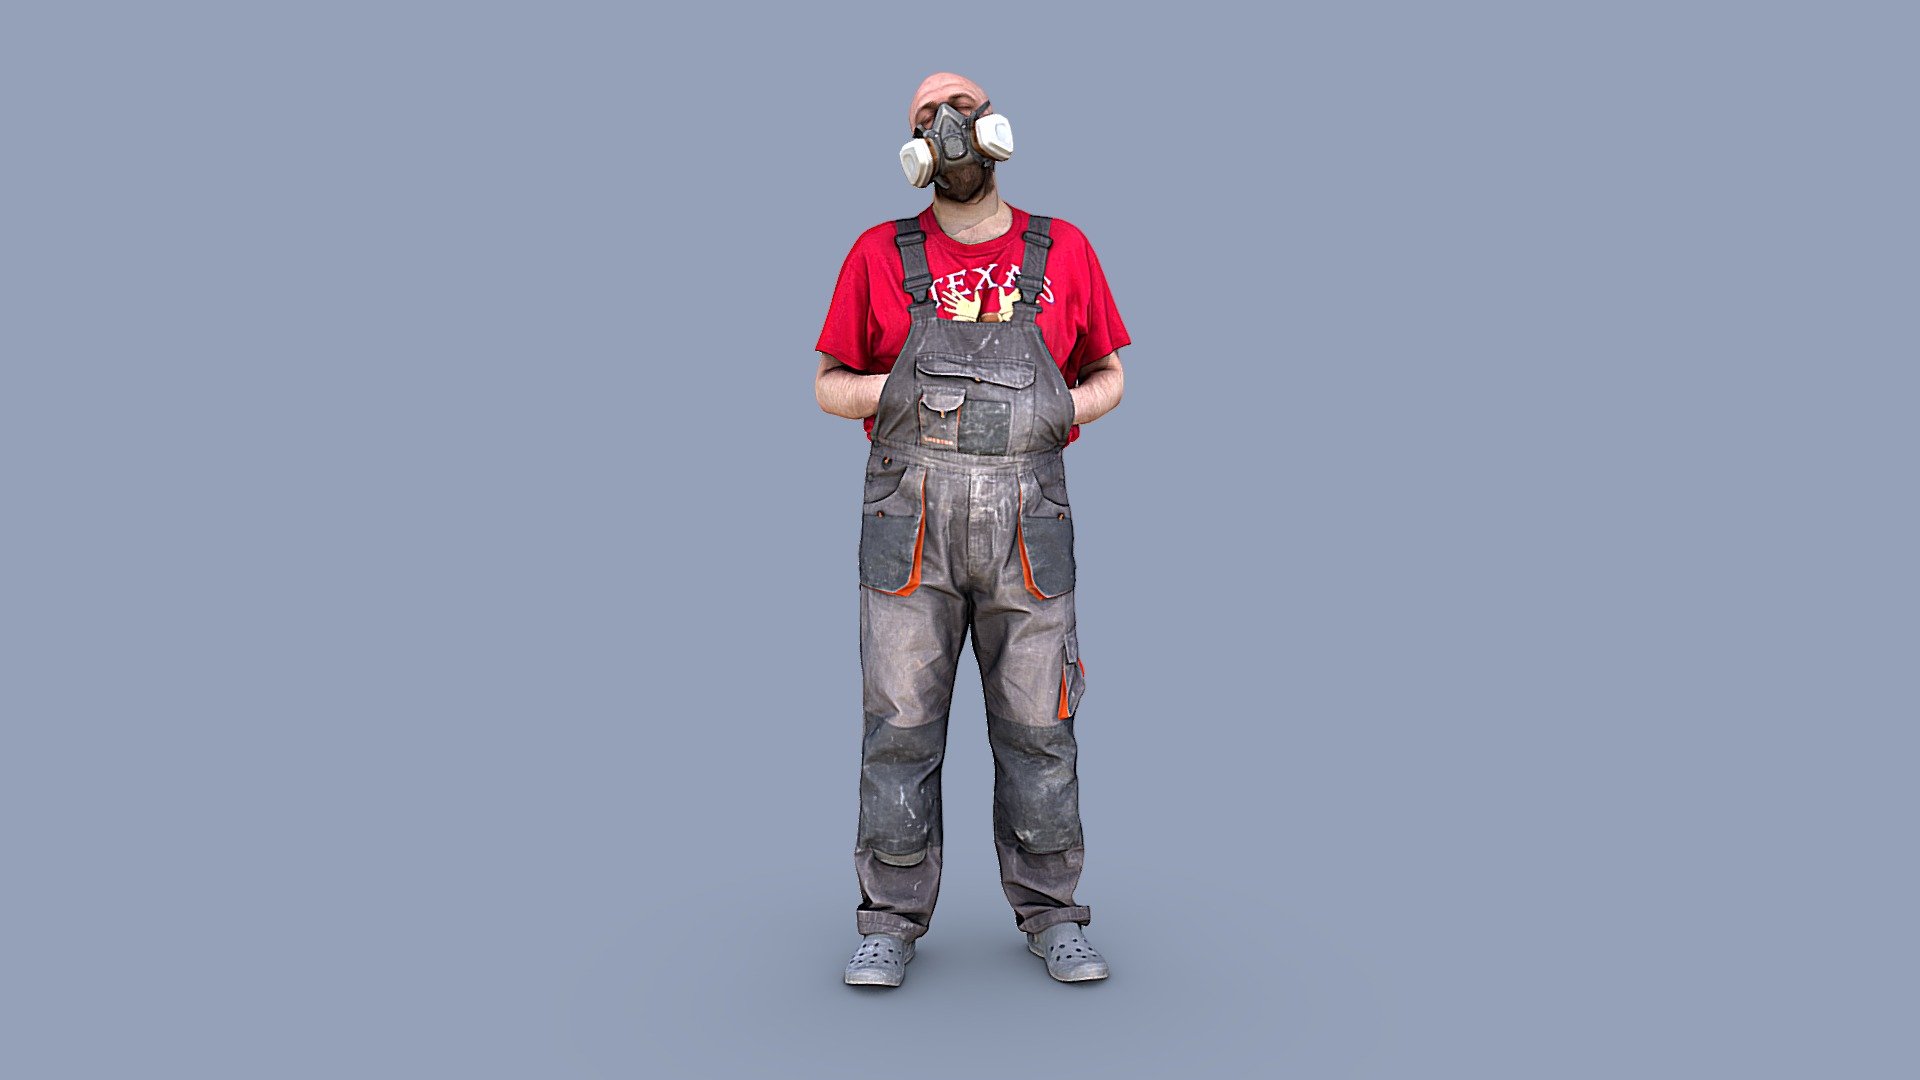 Follow us on instagram ✌🏼

✉️ A young man, a bald guy, a builder, in a working uniform, in an overalls, in a respirator, stands in a relaxed position, his head thrown back and his eyes closed, hands in pockets.

🦾 This model will be an excellent mid-range participant. It does not need to be very close and try to see the details, it reveals and demonstrates its texture as much as possible in case of a certain distance from the foreground.

⚙️ Photorealistic Construction Worker Character 3d model ready for Virtual Reality (VR), Augmented Reality (AR), games and other real-time apps. Suitable for the architectural visualization and another graphical projects. 50 000 polygons per model 3d model